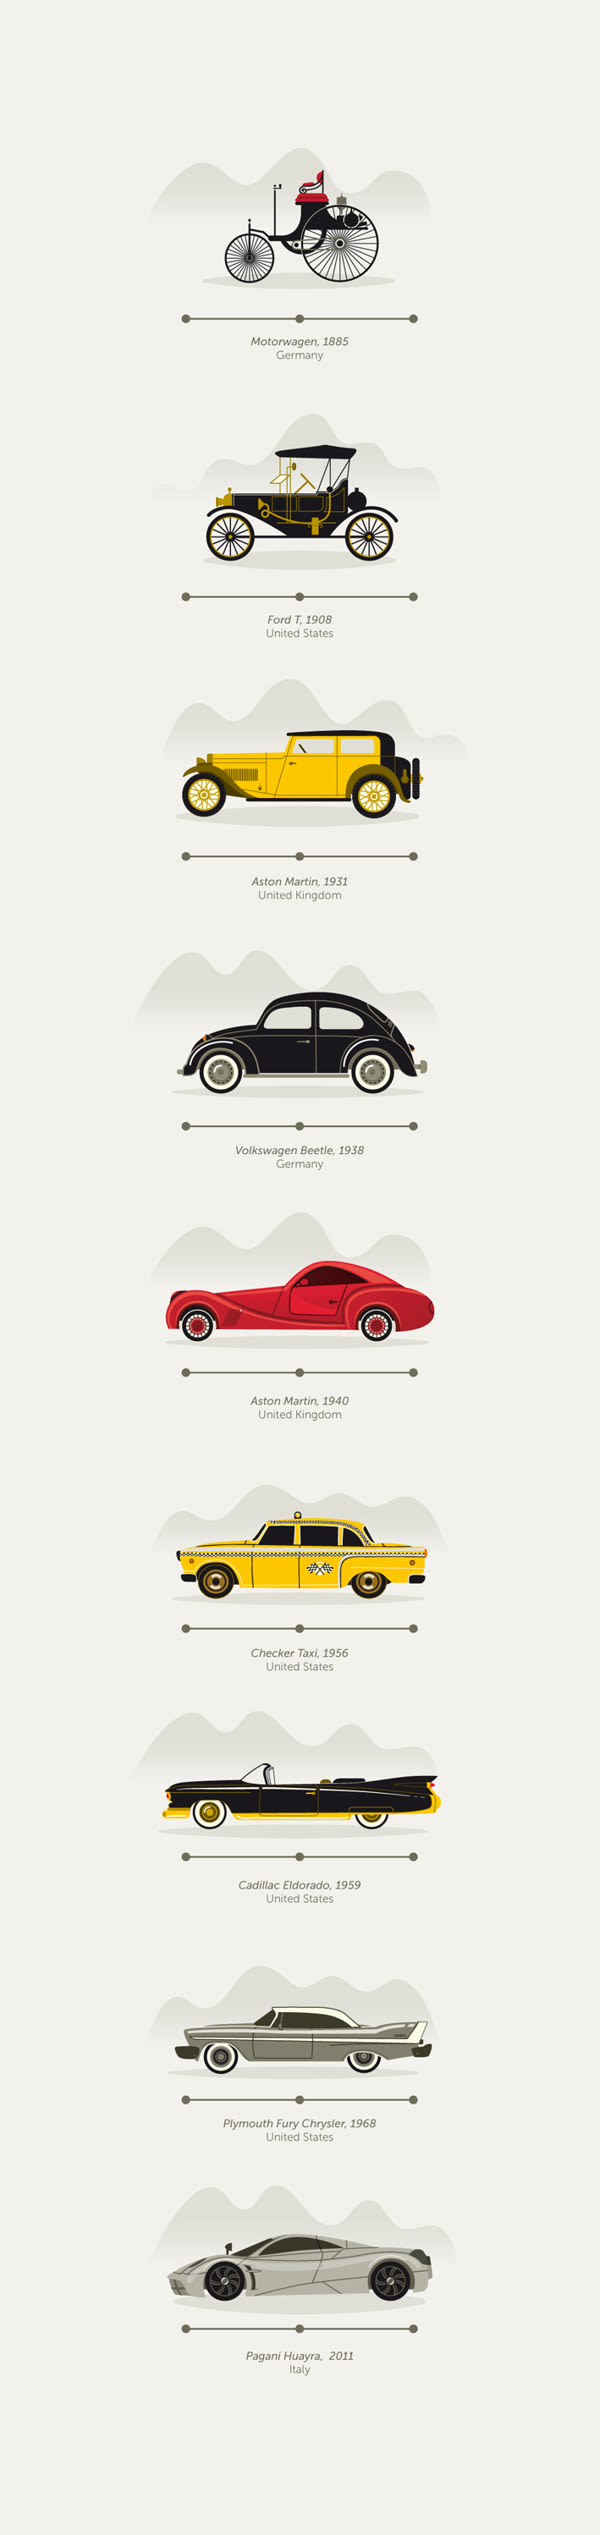 History of the Automobile 2